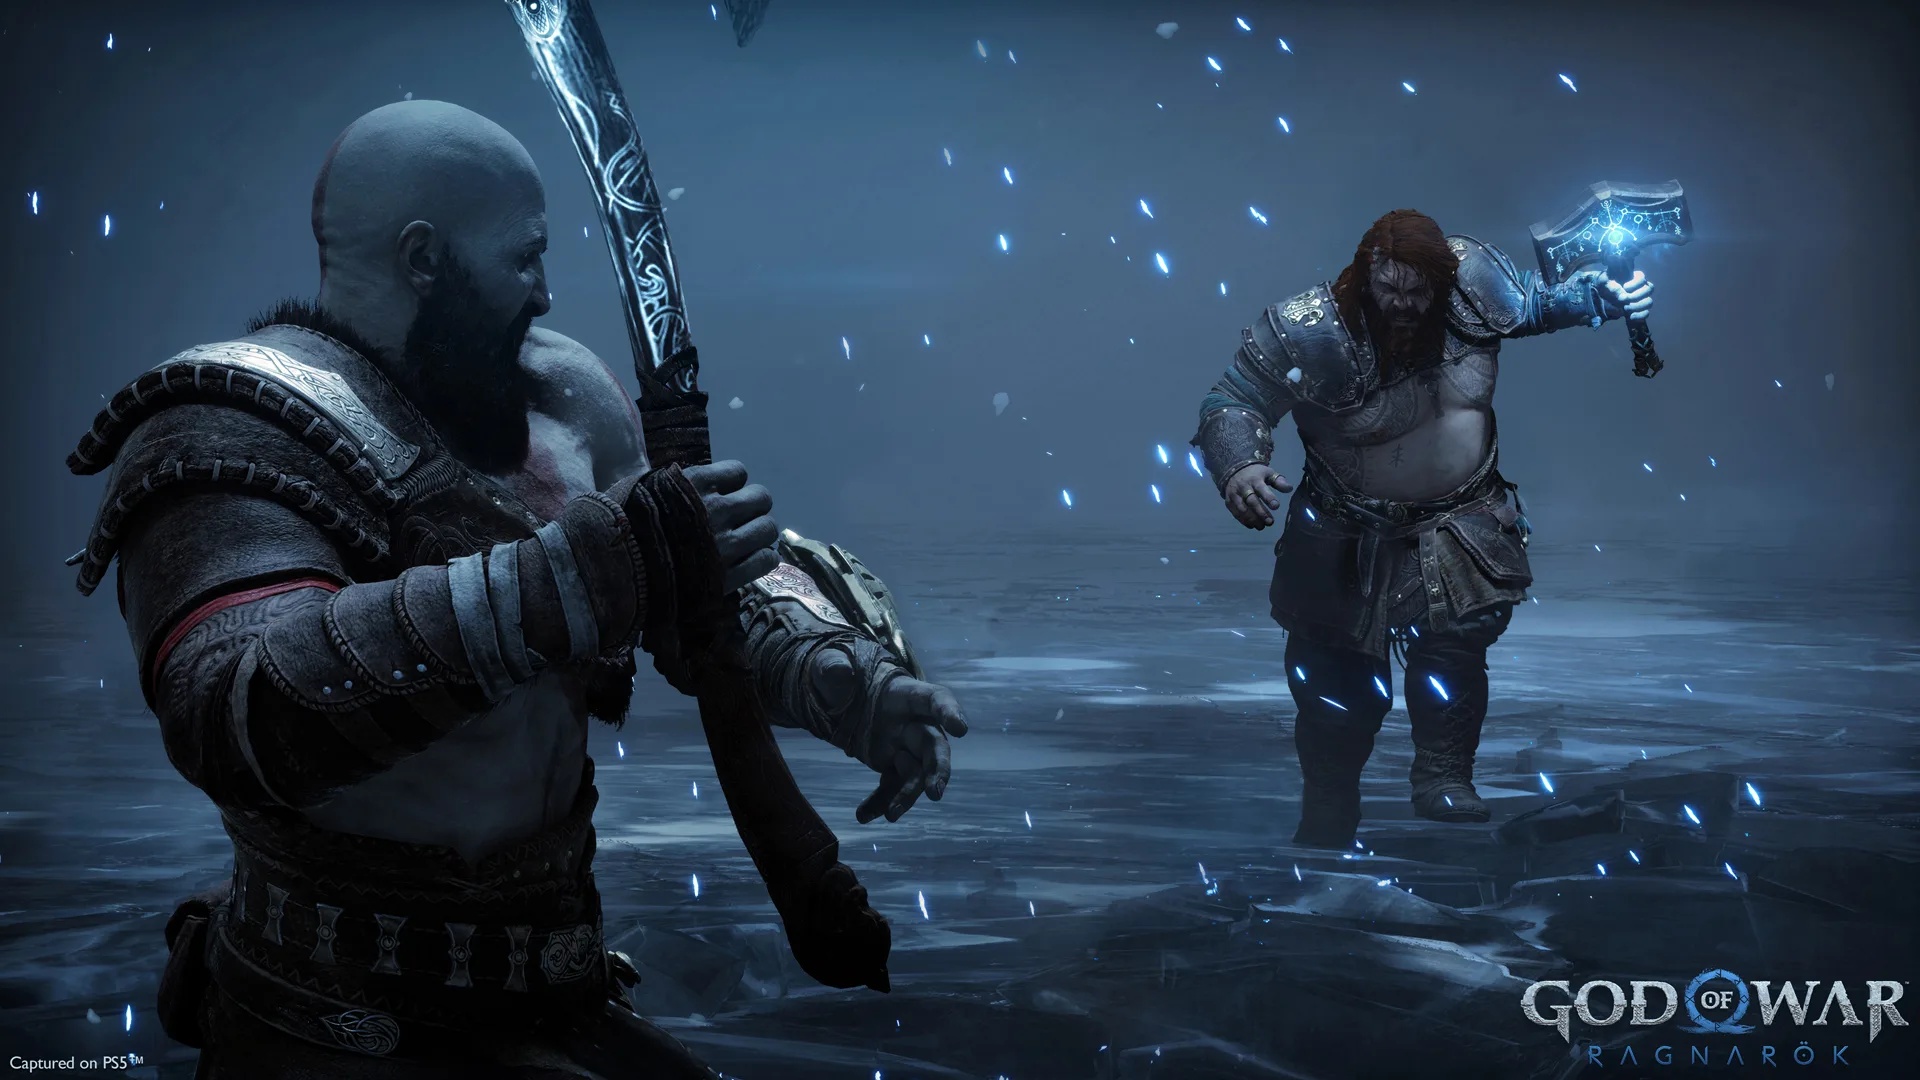 God of War Ragnarok story trailer gives us more glimpses of red headed Thor